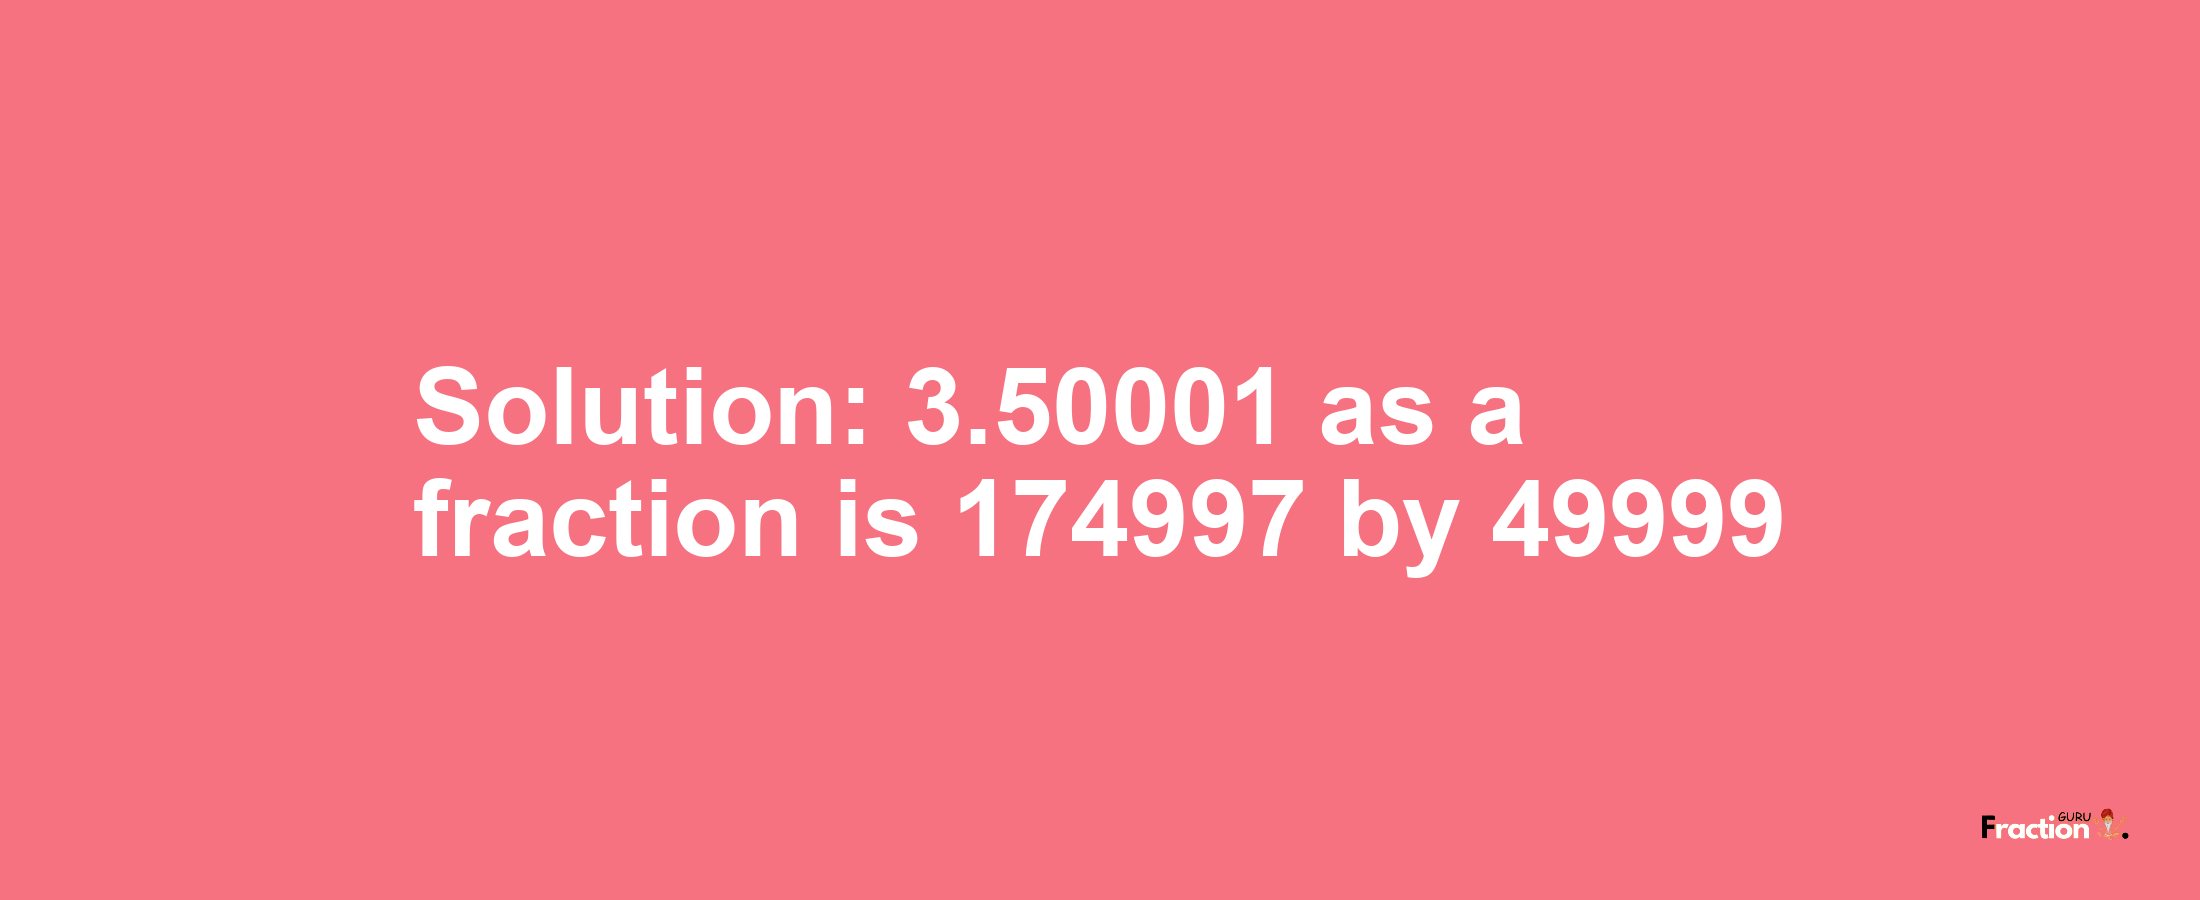 Solution:3.50001 as a fraction is 174997/49999